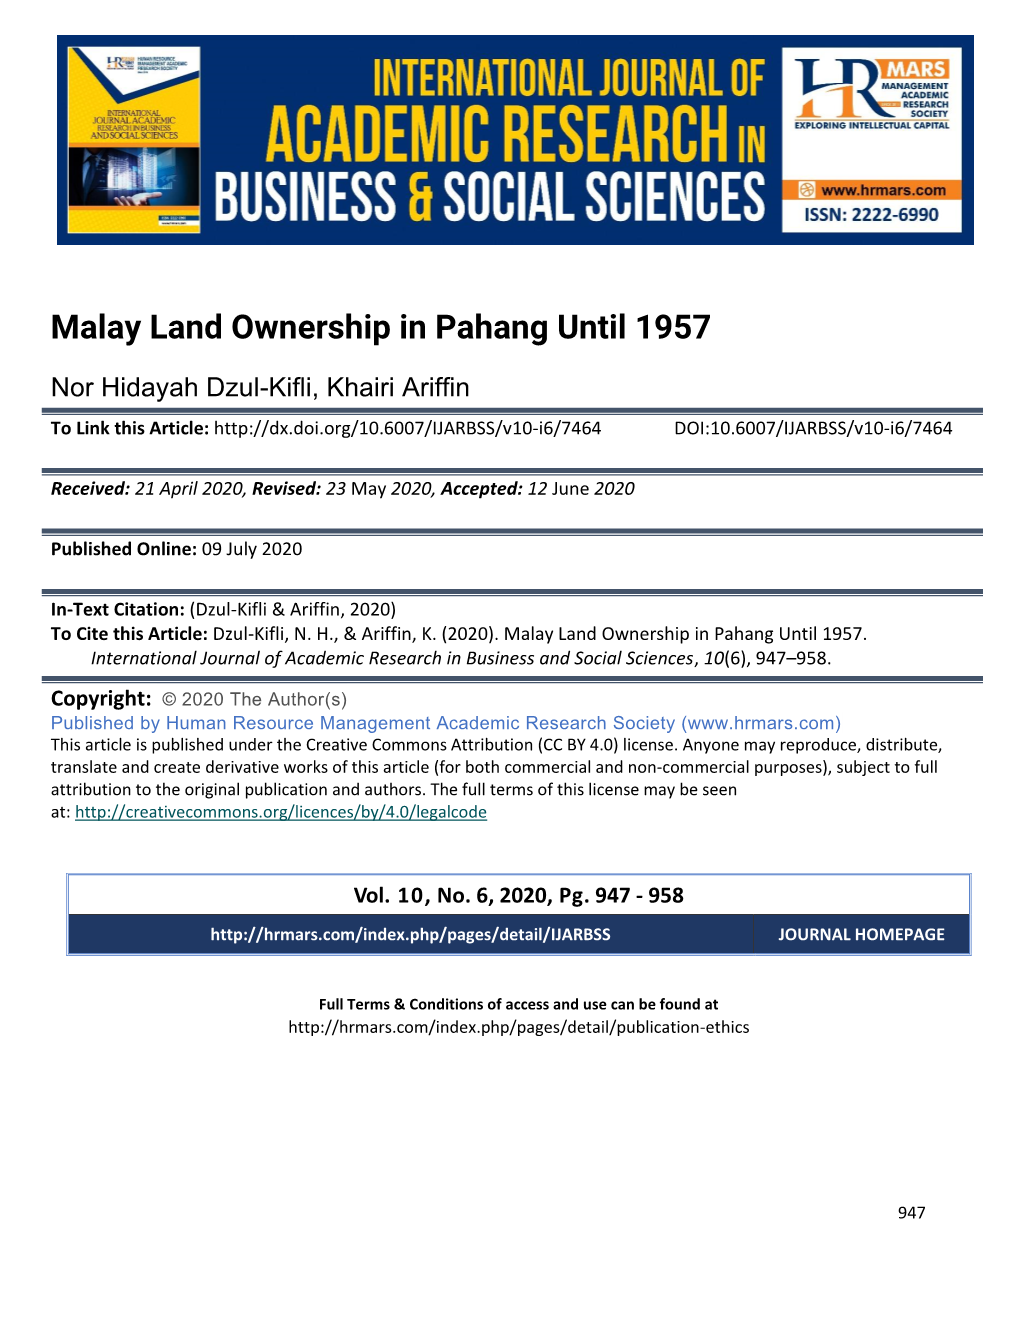 Malay Land Ownership in Pahang Until 1957